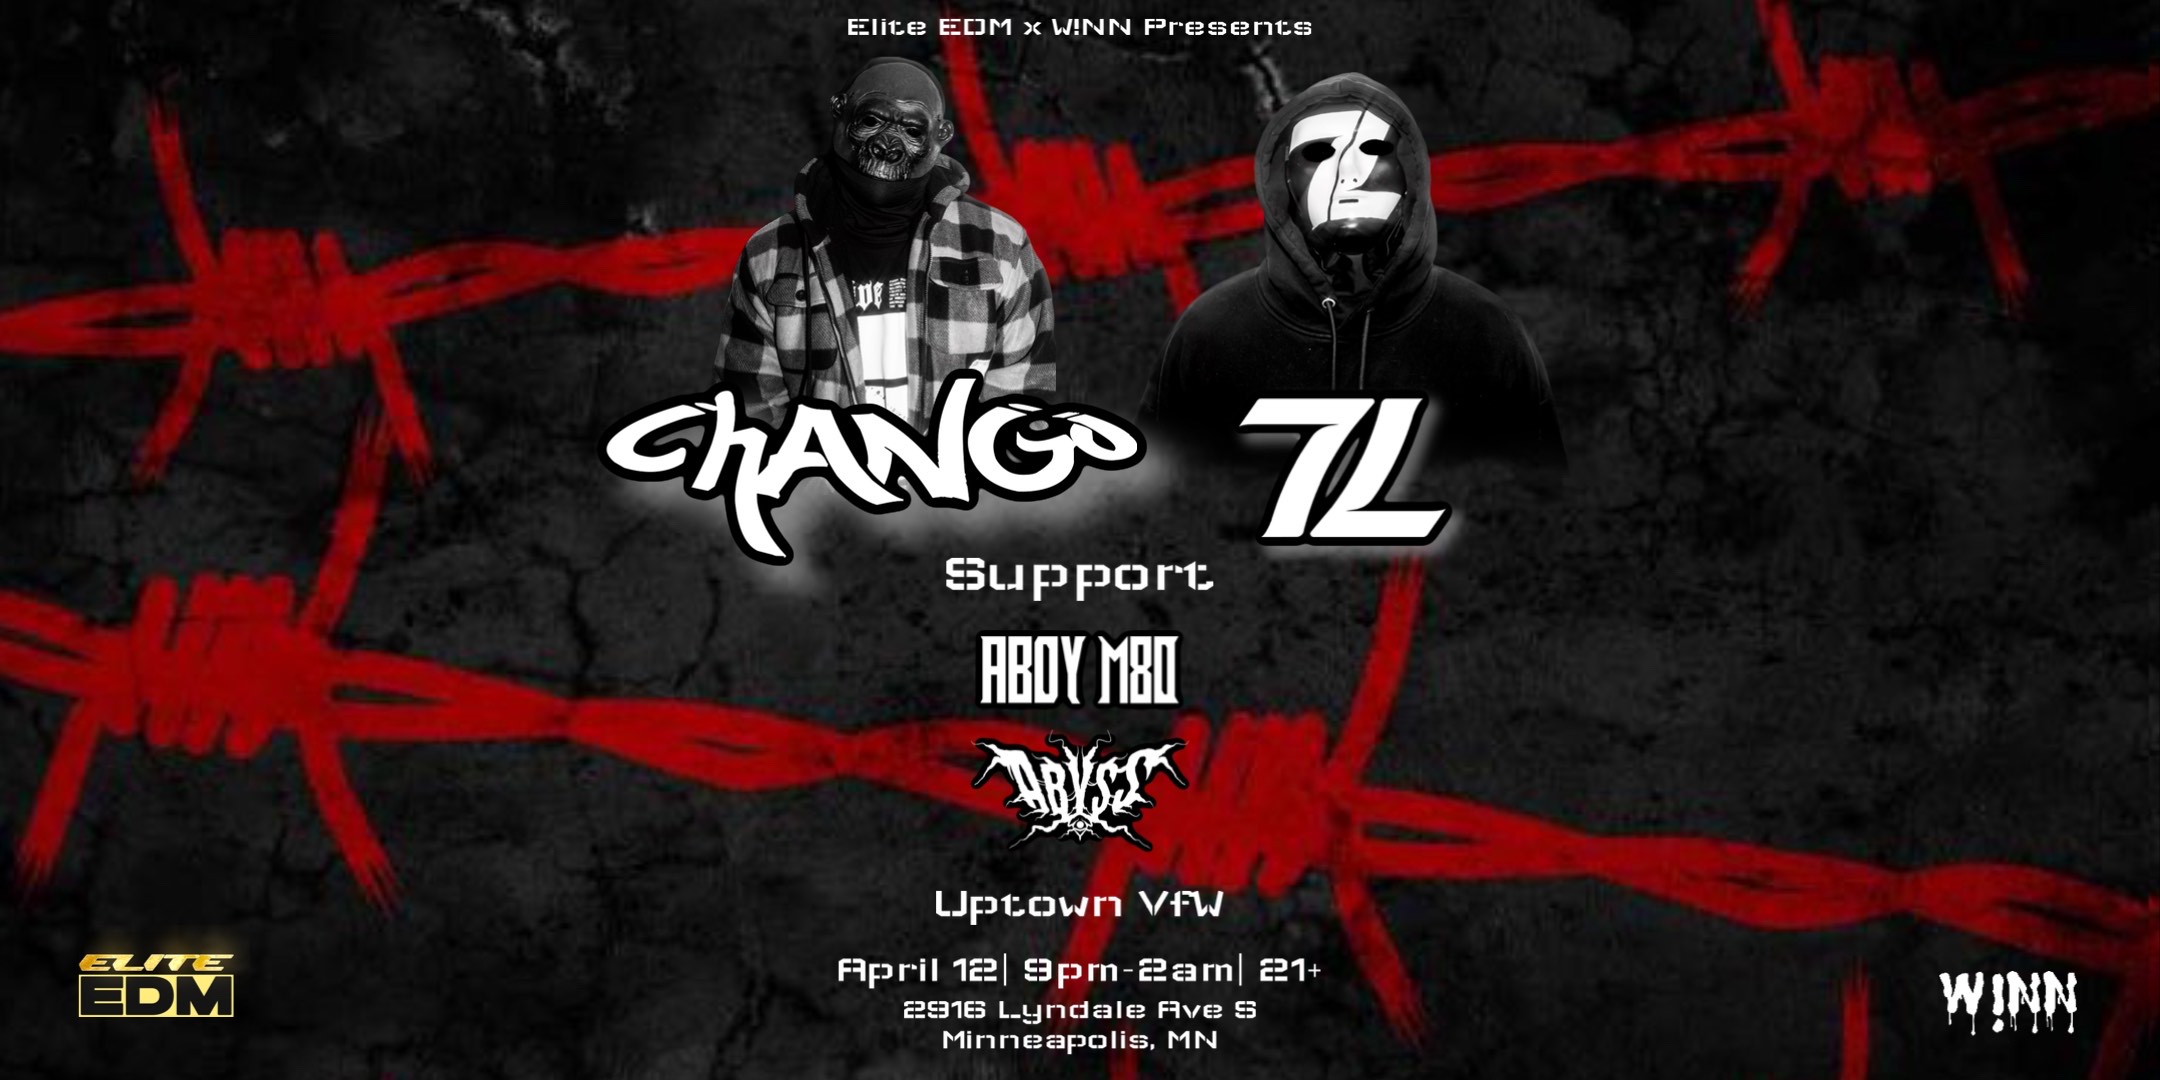 Elite EDM and Winn Presents: Chango and 7L (Minneapolis debut) Support by: Aboy M80 and Abyss Friday, April 12 James Ballentine “Uptown” VFW Post 246 Doors 9:00::Music 9pm::21+ GA $20 ADV / $25 DOS